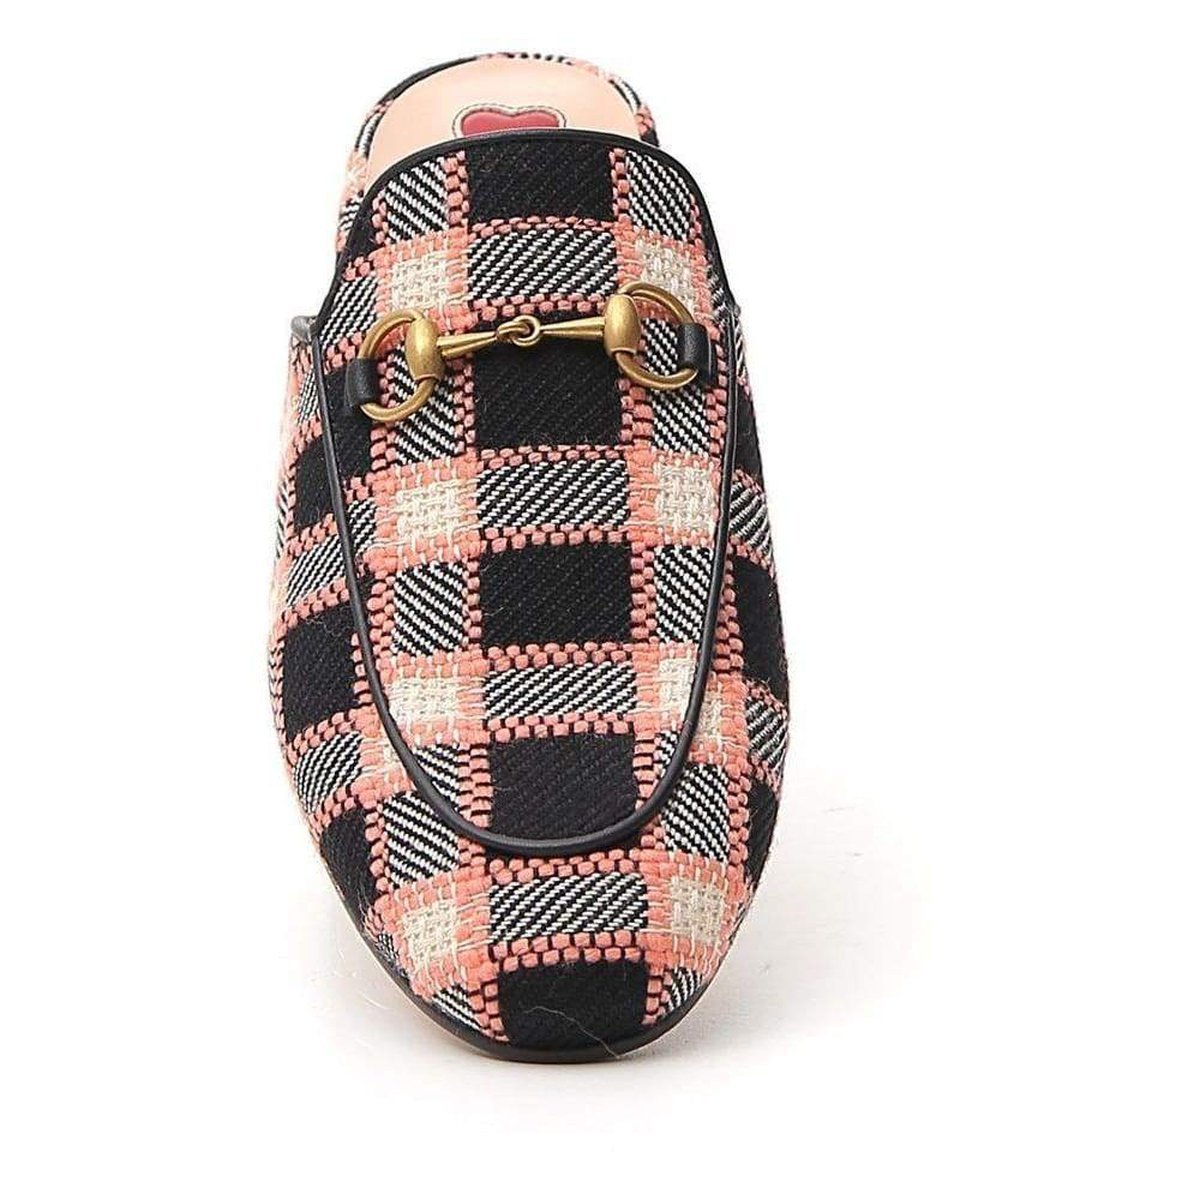 Princetown Tweed Check Woven Mules